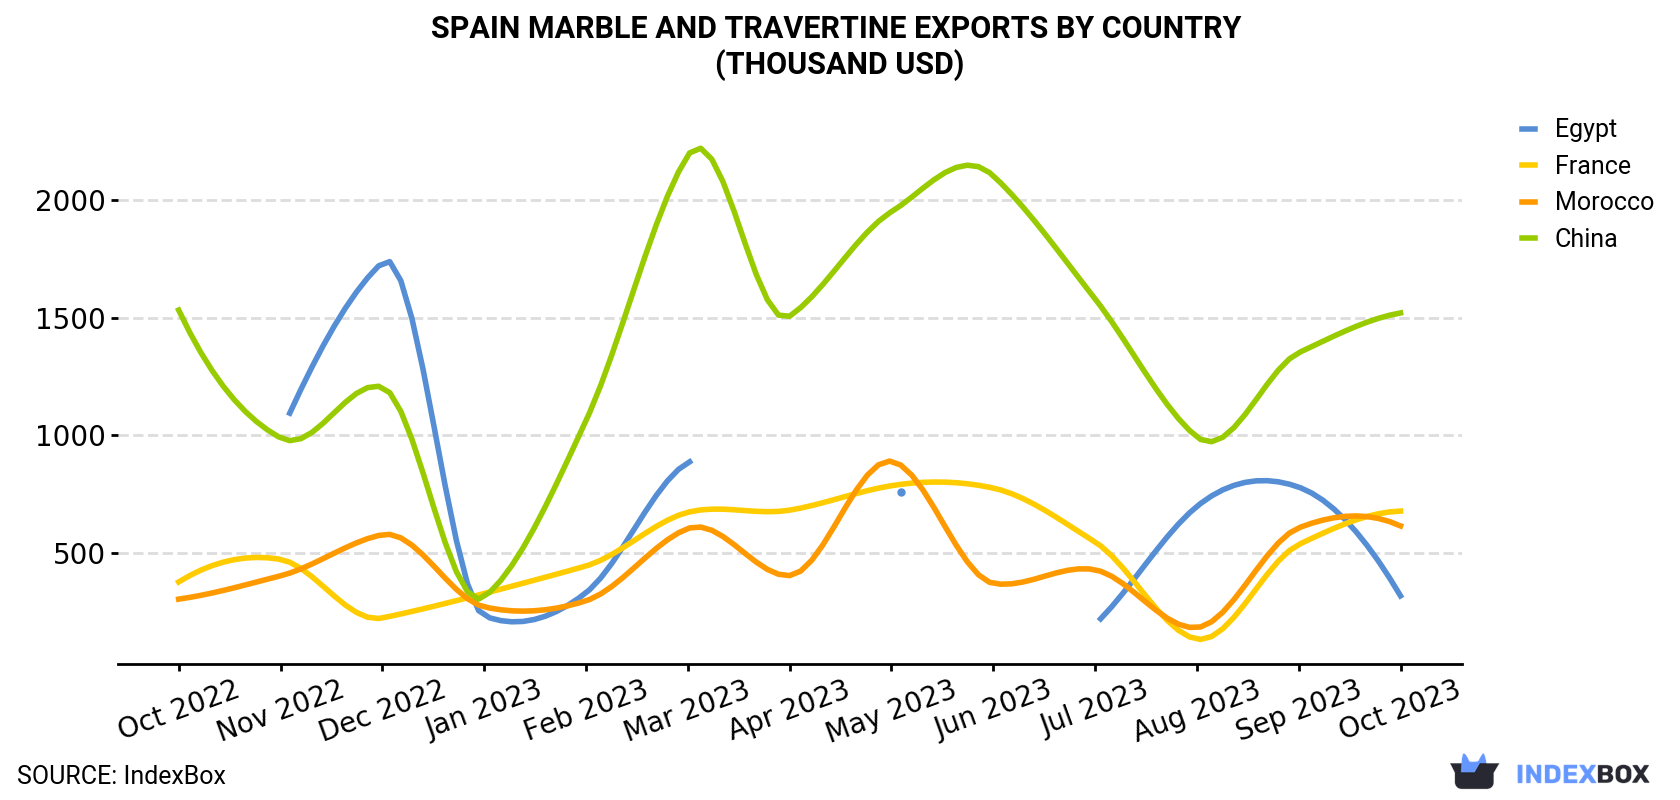 Spain Marble And Travertine Exports By Country (Thousand USD)